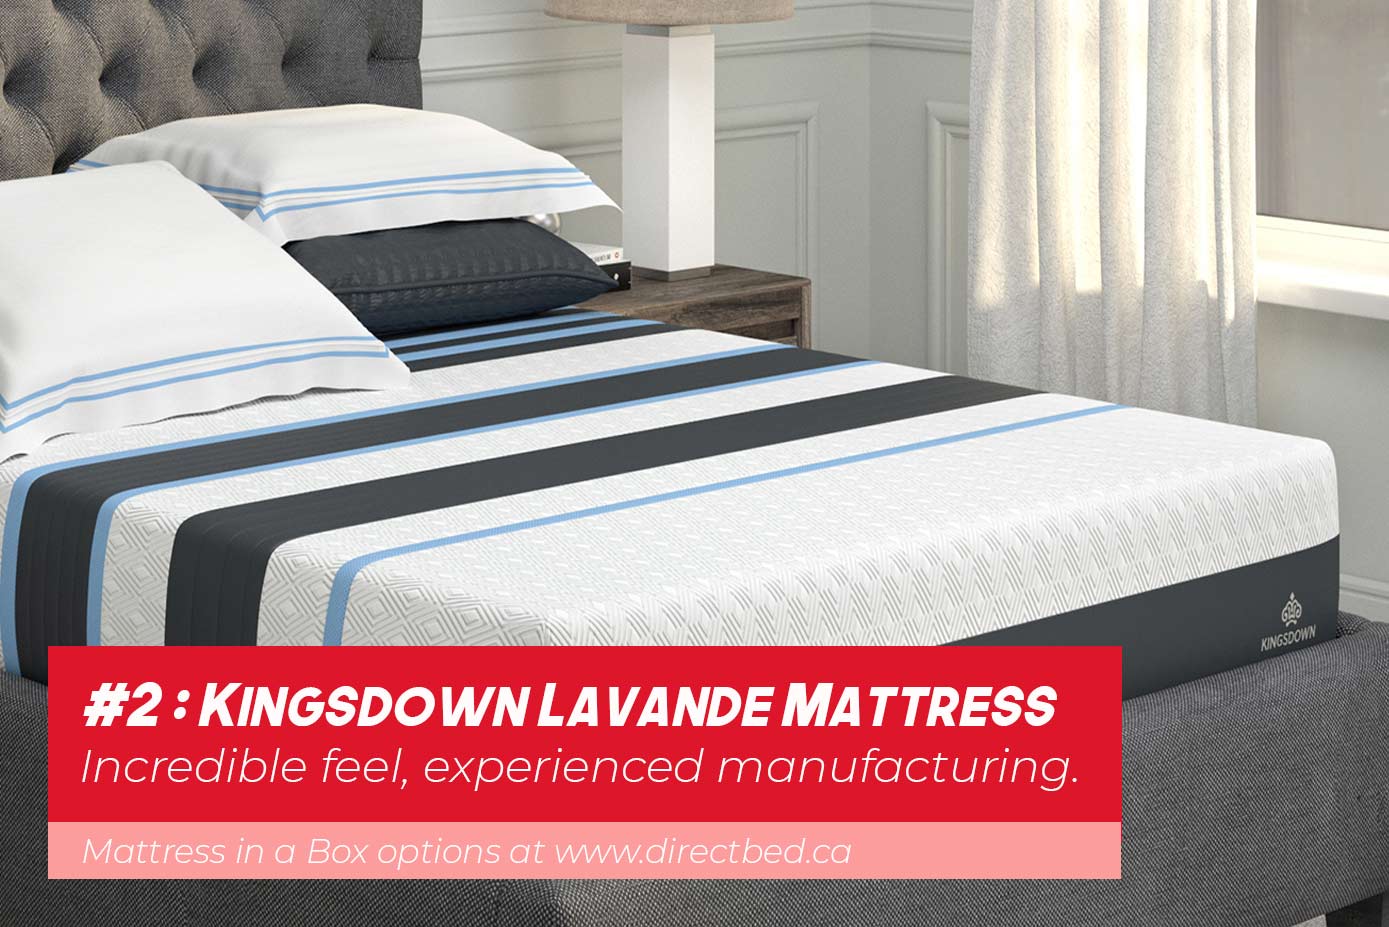 Kingsdown Lavande Mattress in a box Canada pictured on a linen bed